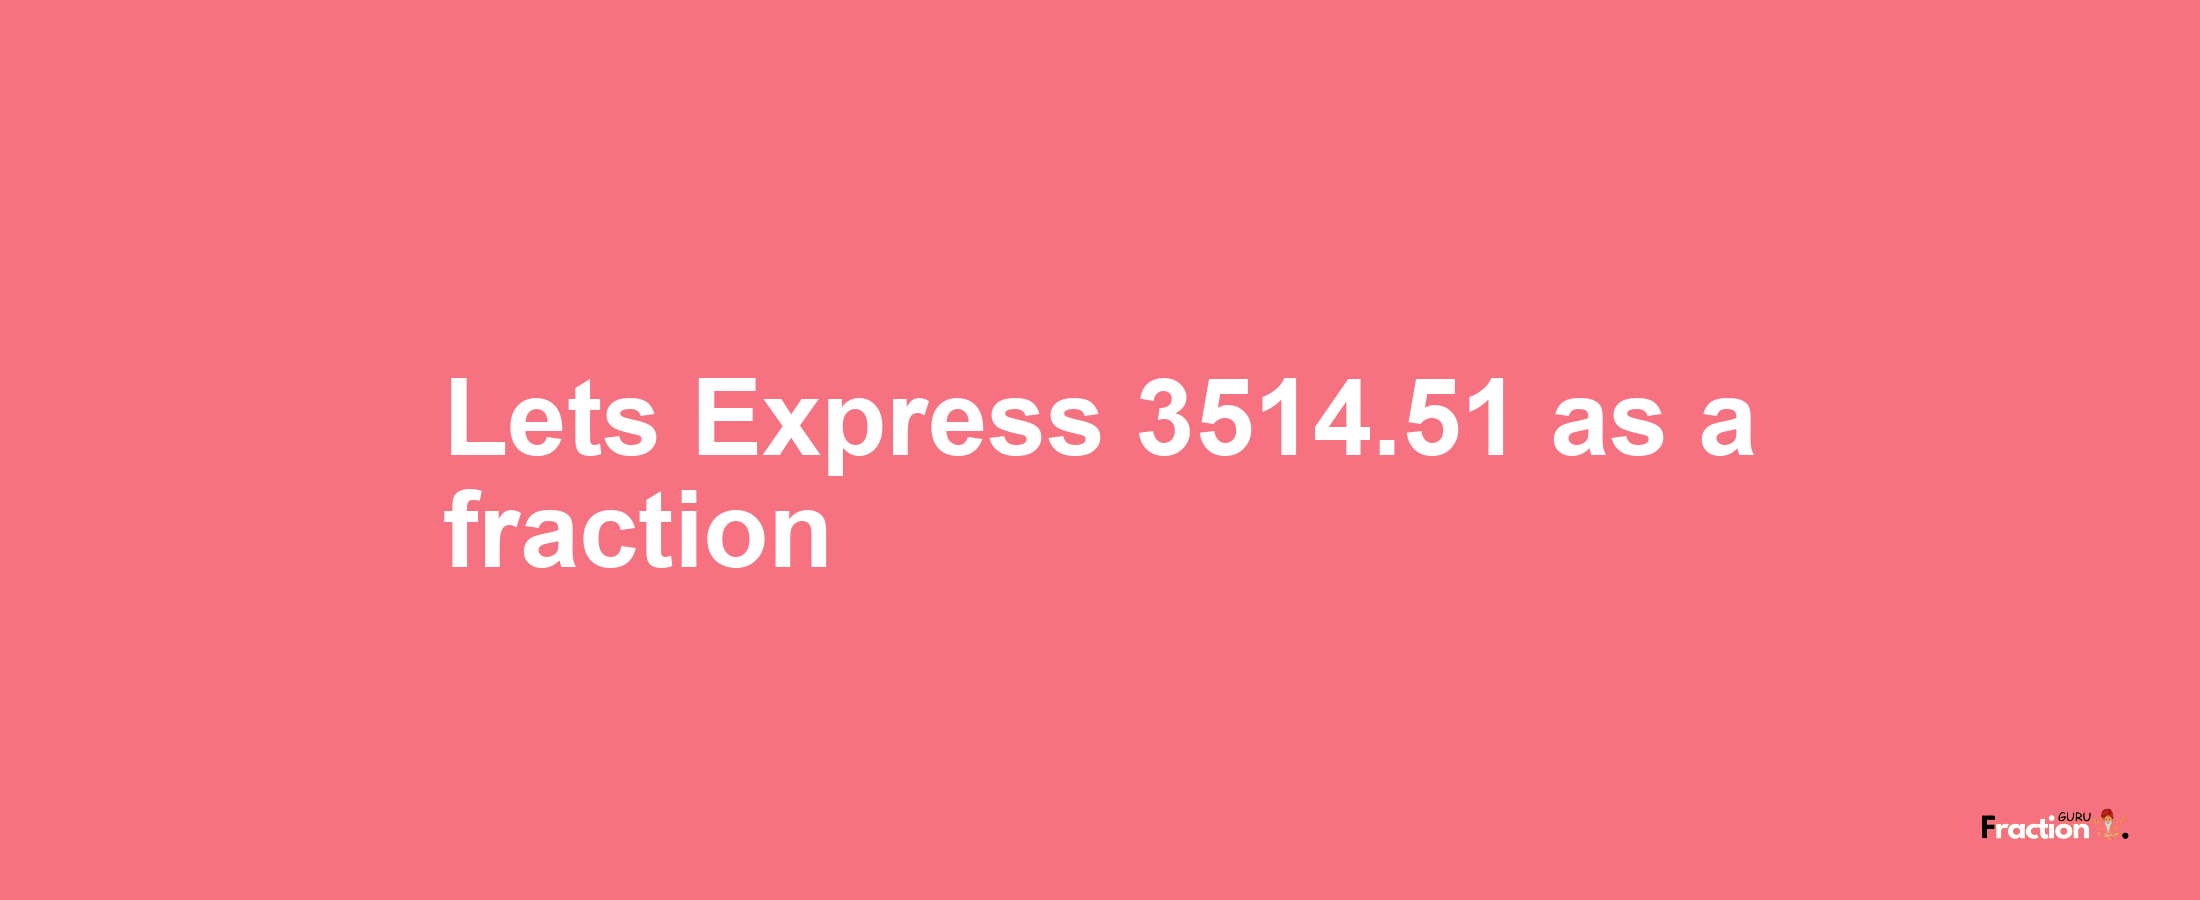 Lets Express 3514.51 as afraction